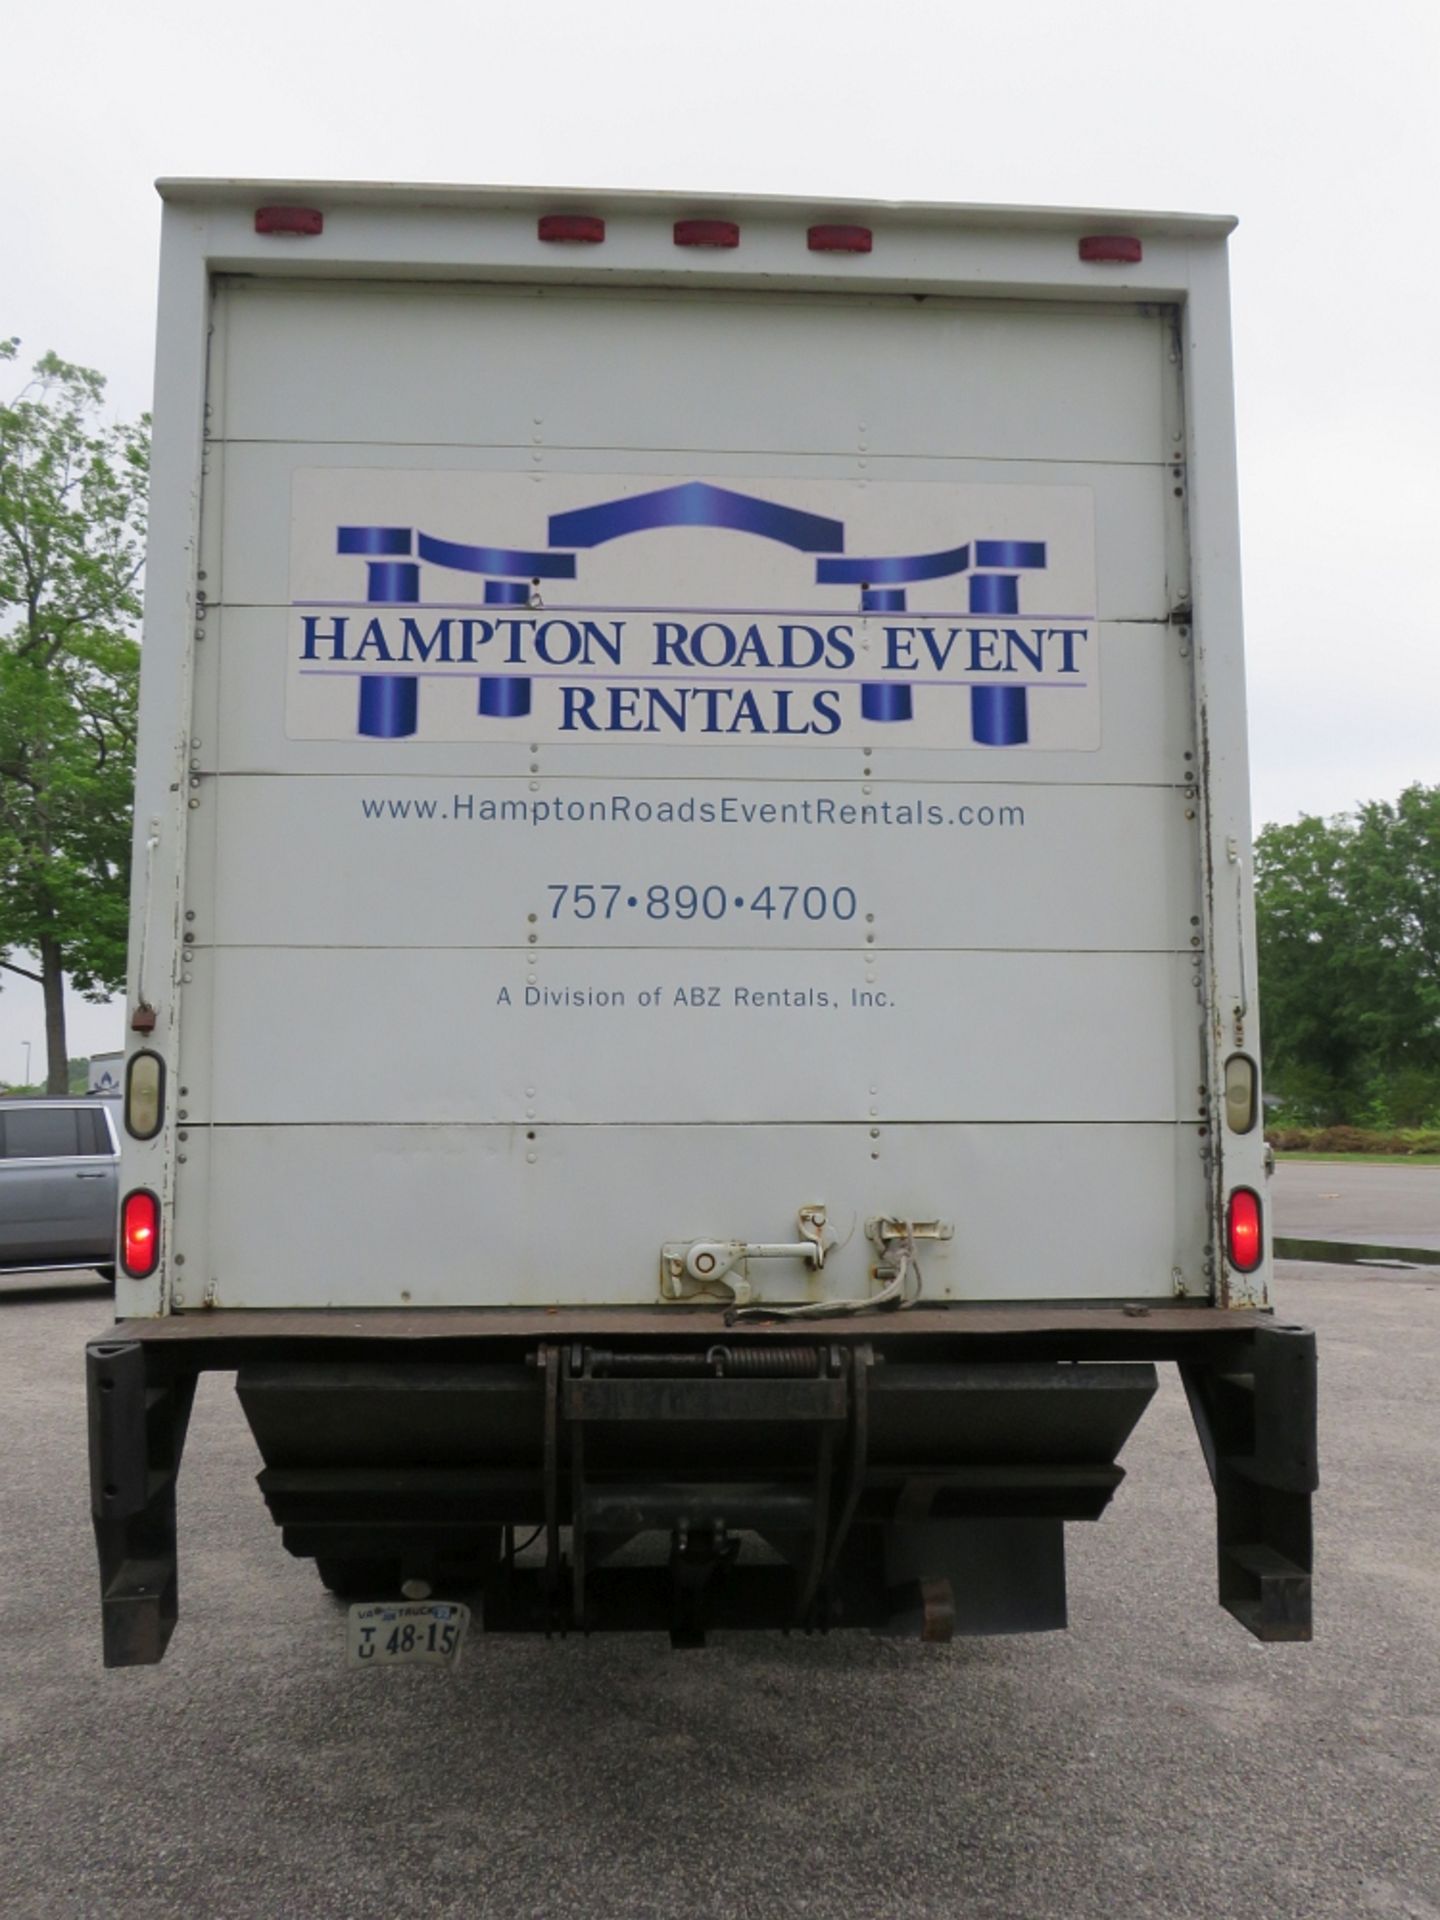 1996 International 4700 Delivery Truck, 22' Box, - Image 4 of 8